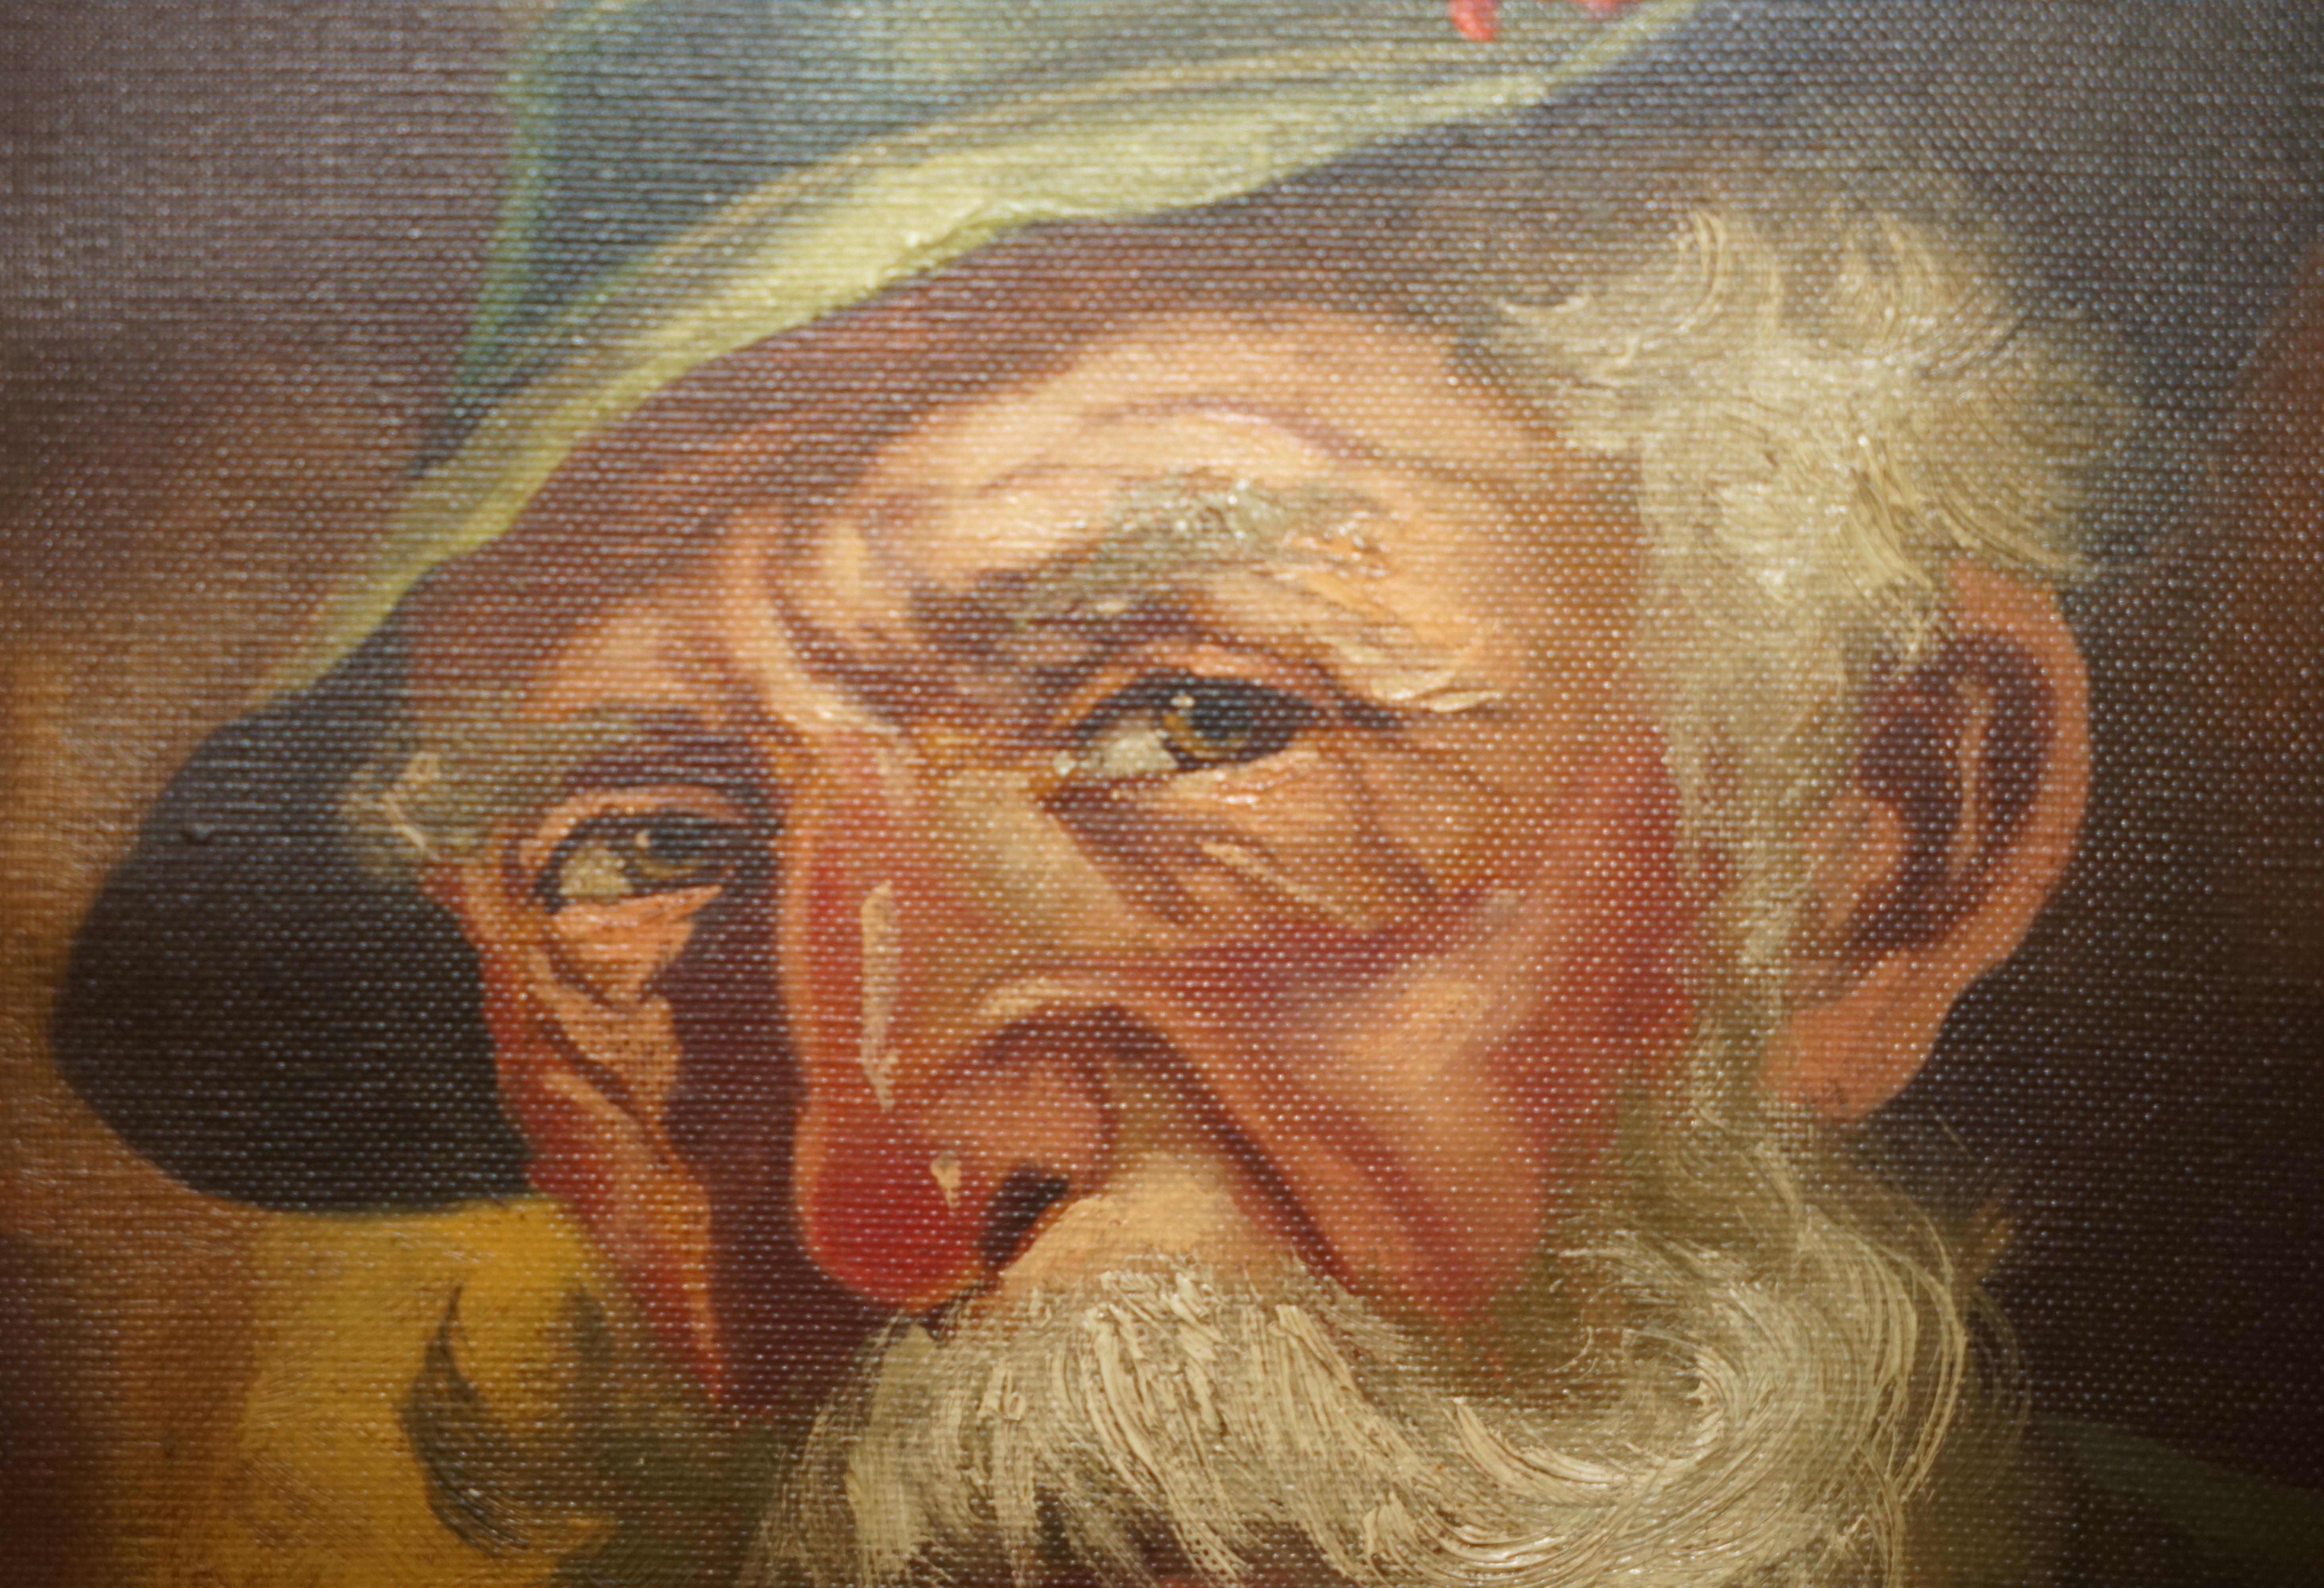 Antique Signed Dutch Oil on Canvas Painting of Old Man Man with Grey Hair & CAP For Sale 3